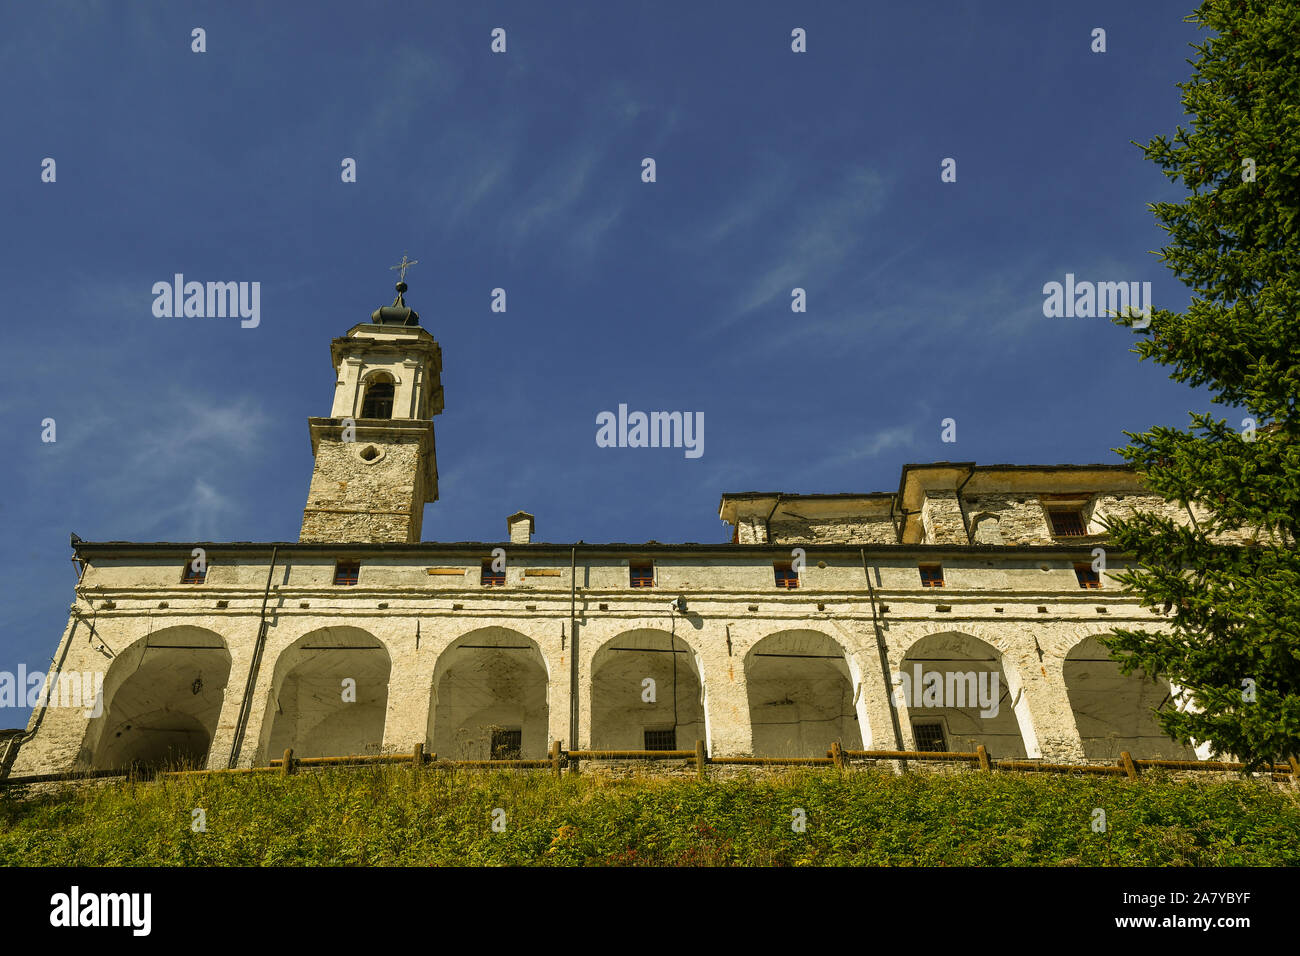 Low angle view of the Sanctuary of St Magno with an ancient arcade and the stone bell tower against clear blue sky, Castelmagno, Piedmont, Italy Stock Photo